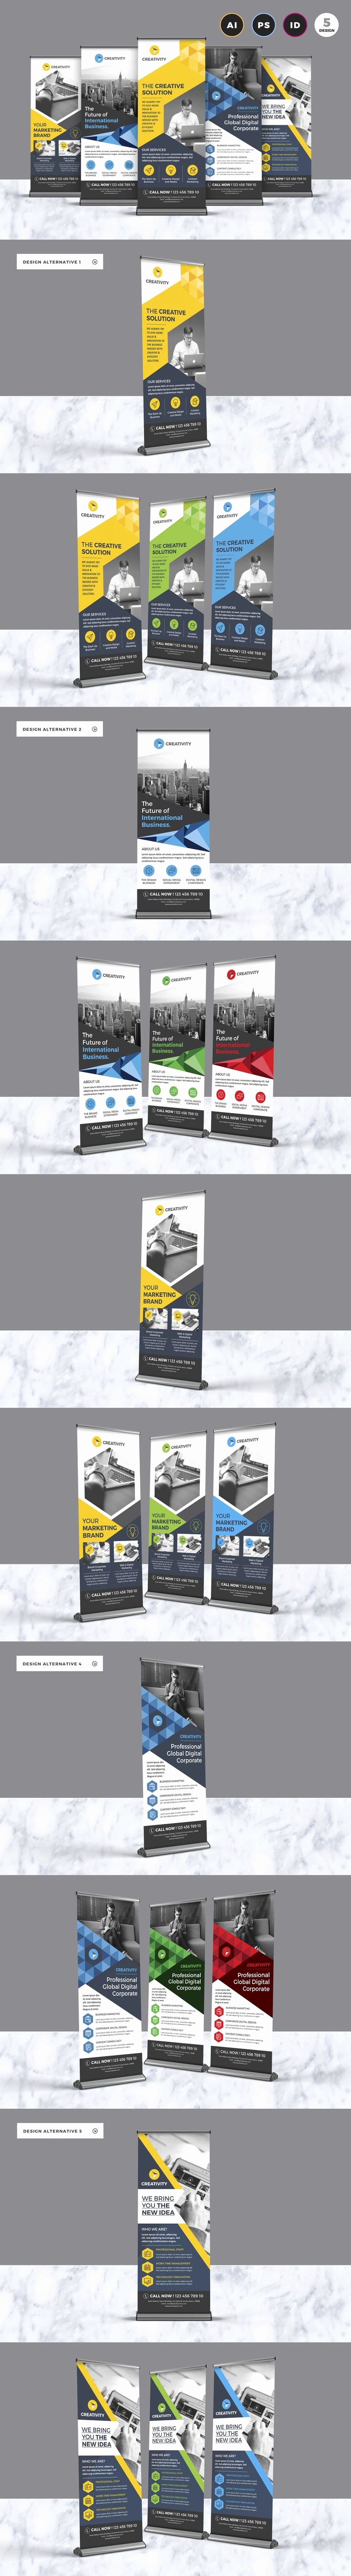 Retractable Banner Design Template Awesome Trade Show Retractable Banners Fresh Les 60 Meilleures